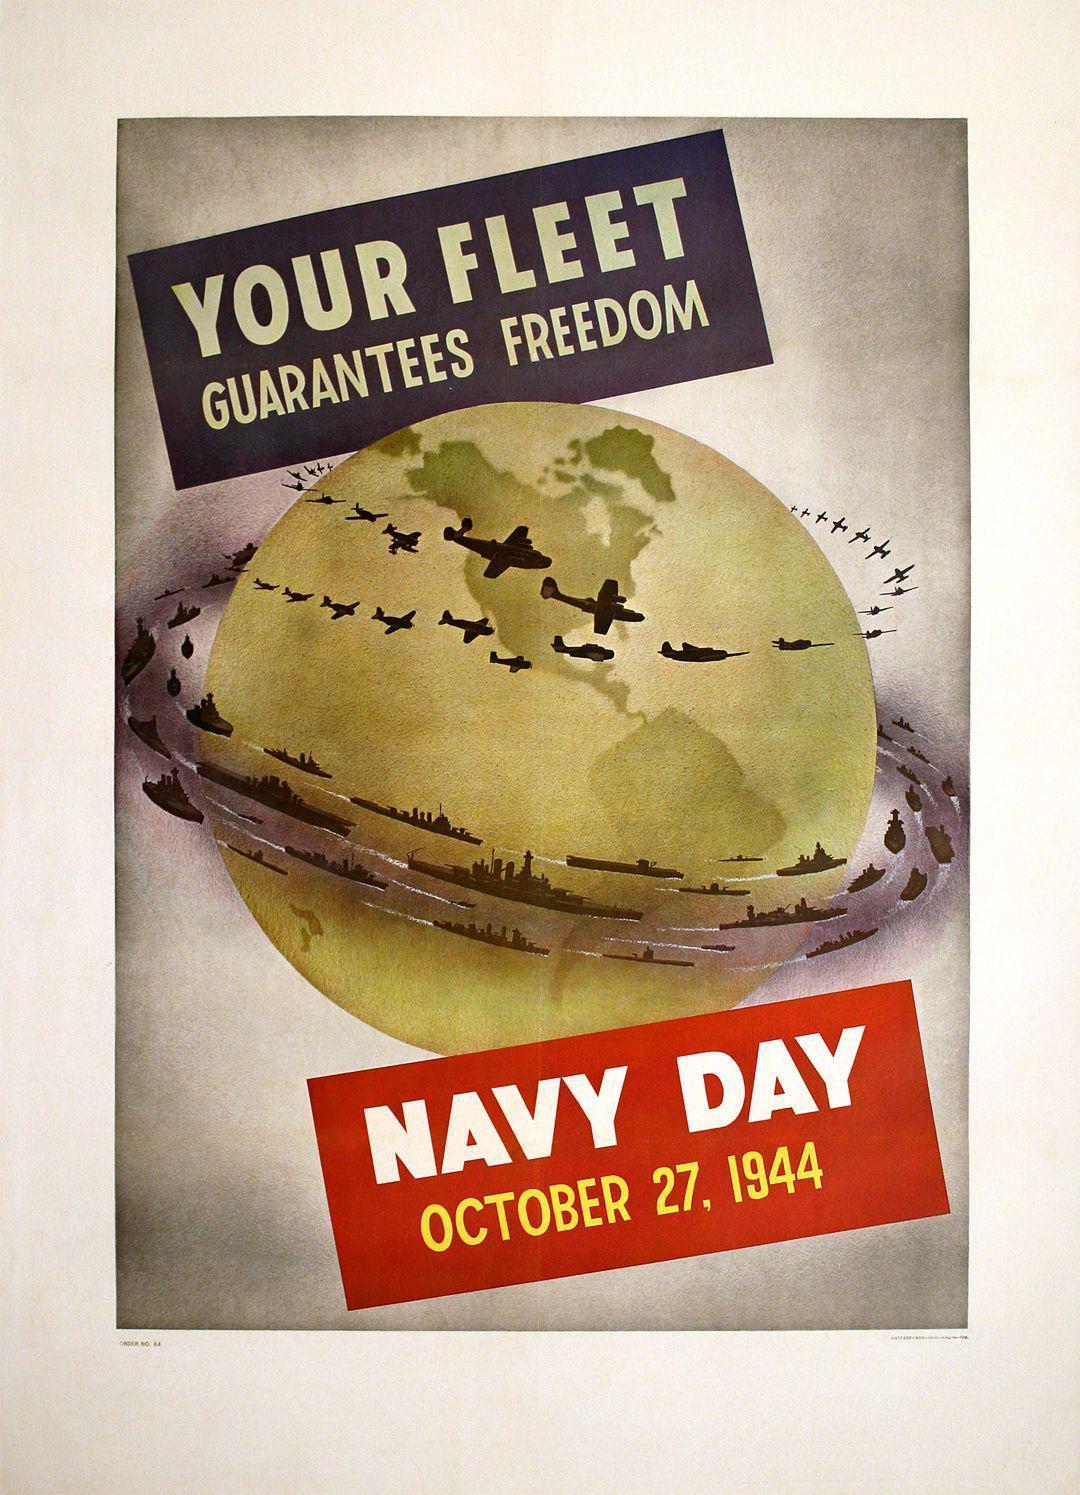 Original WWII Poster - Your Fleet guarantees Freedom - Navy Day October 27, 1944